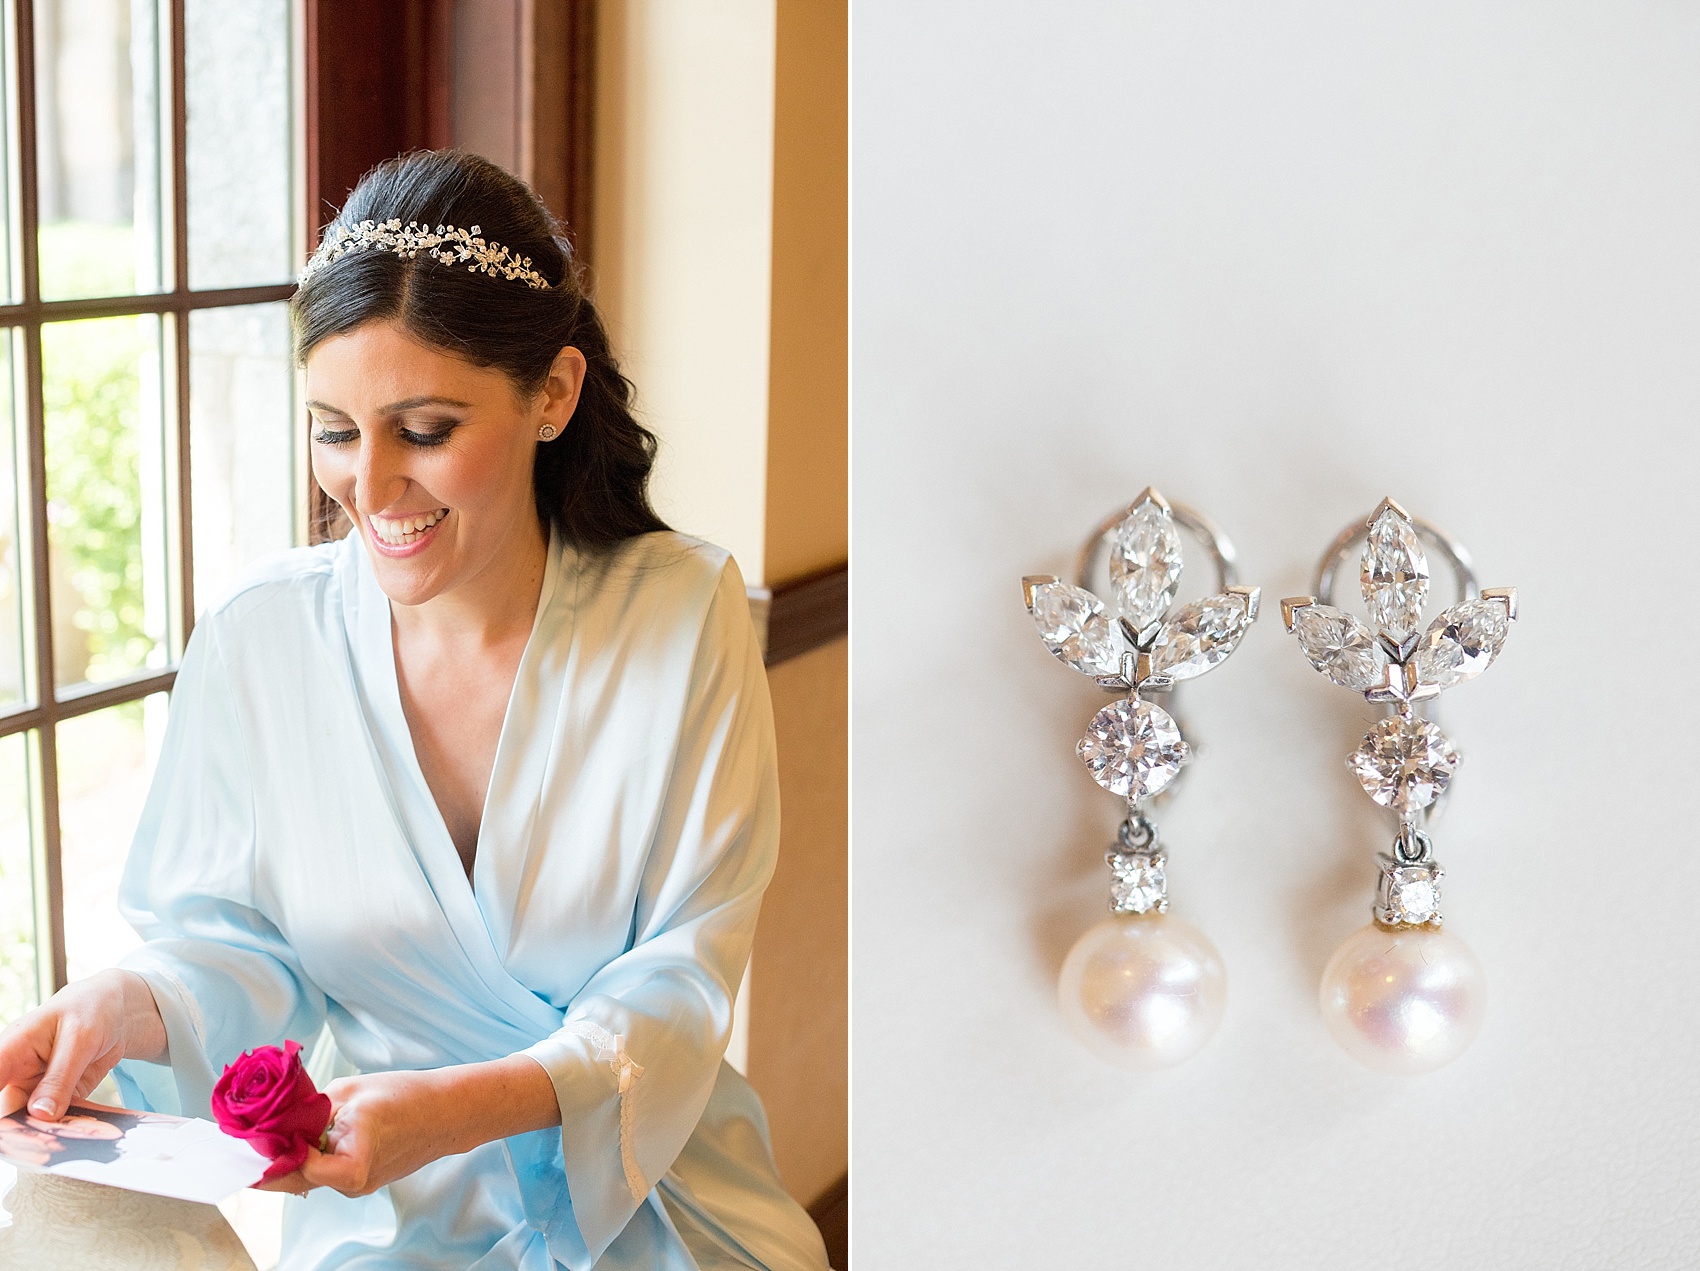 Mikkel Paige Photography detail photo of bride's wedding day earrings in diamonds and pearls for her Temple Emanu-El ceremony.